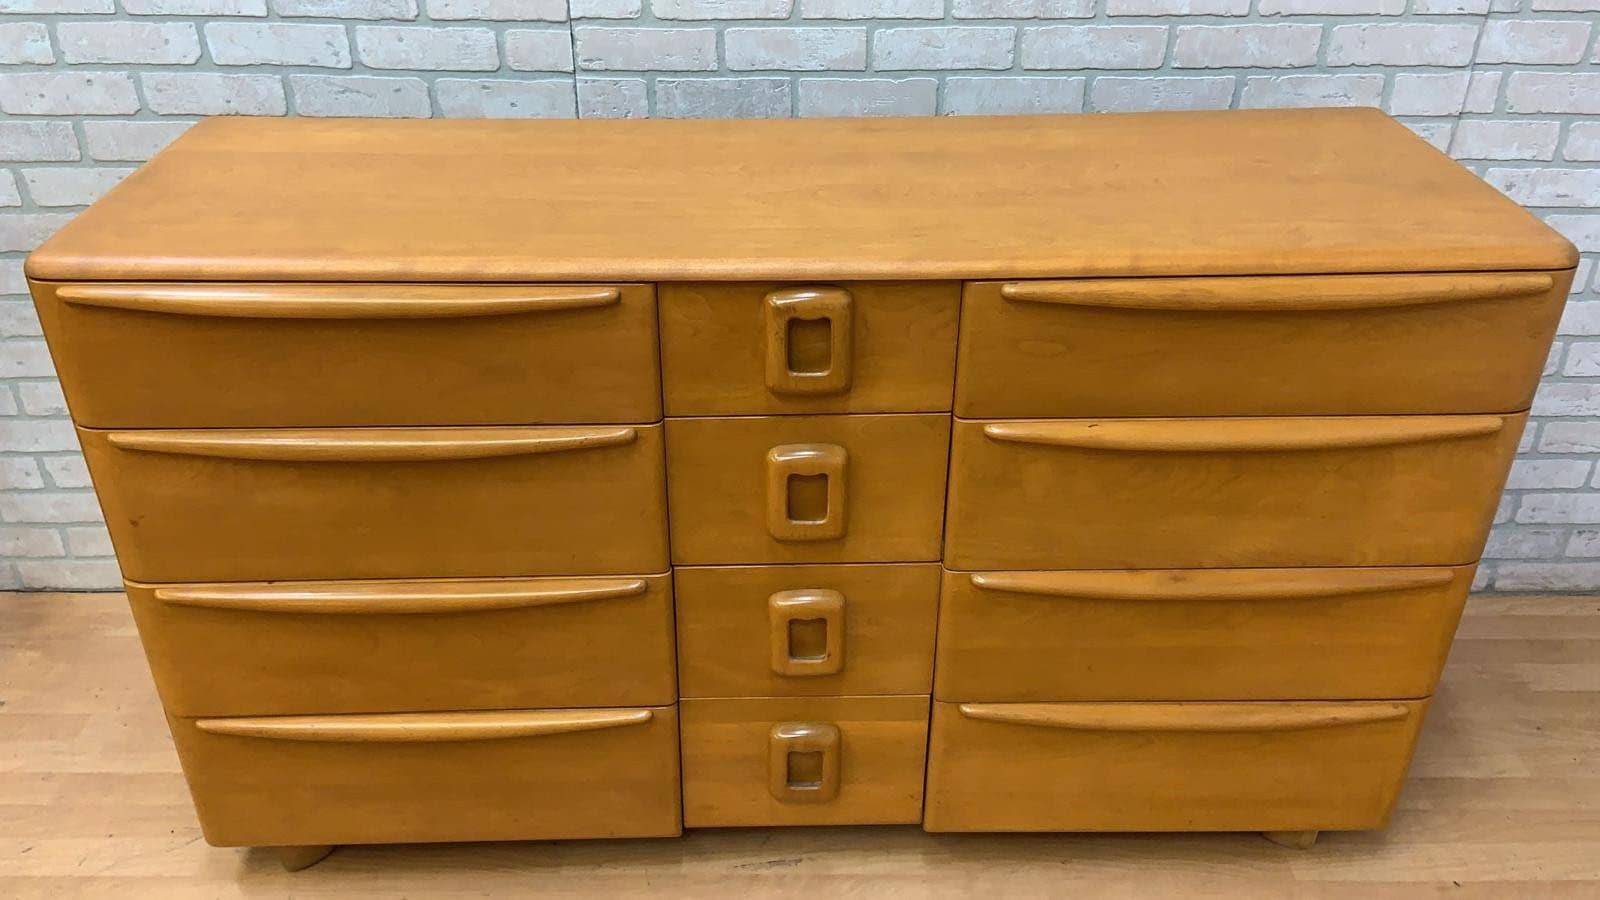 Mid-Century Modern Heywood Wakefield champagne twelve drawer dresser chest

Beautiful Heywood Wakefield twelve drawer champagne chest of drawers. This dresser features the coveted drawer pulls.

circa 1950

Dimensions 

H 33”
W 60”
D 20”.